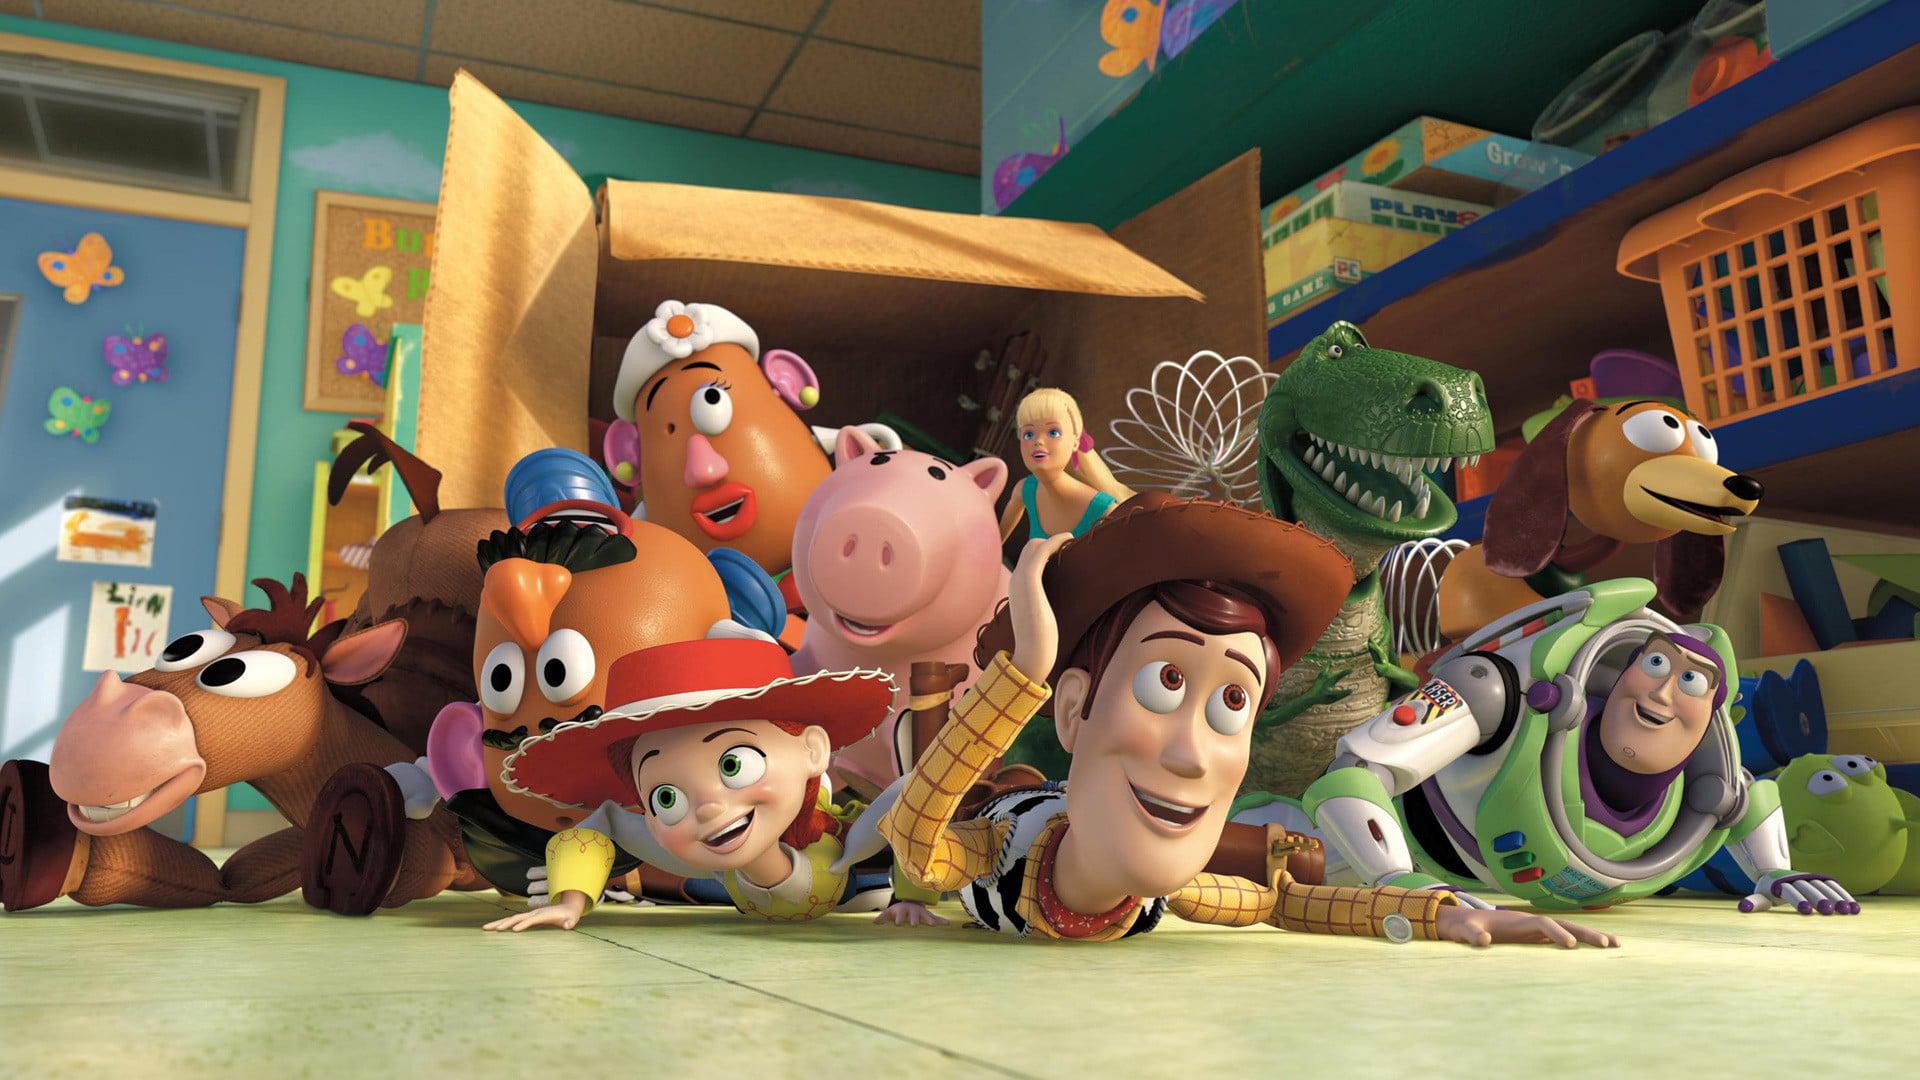 Backdrop Image for Toy Story 3